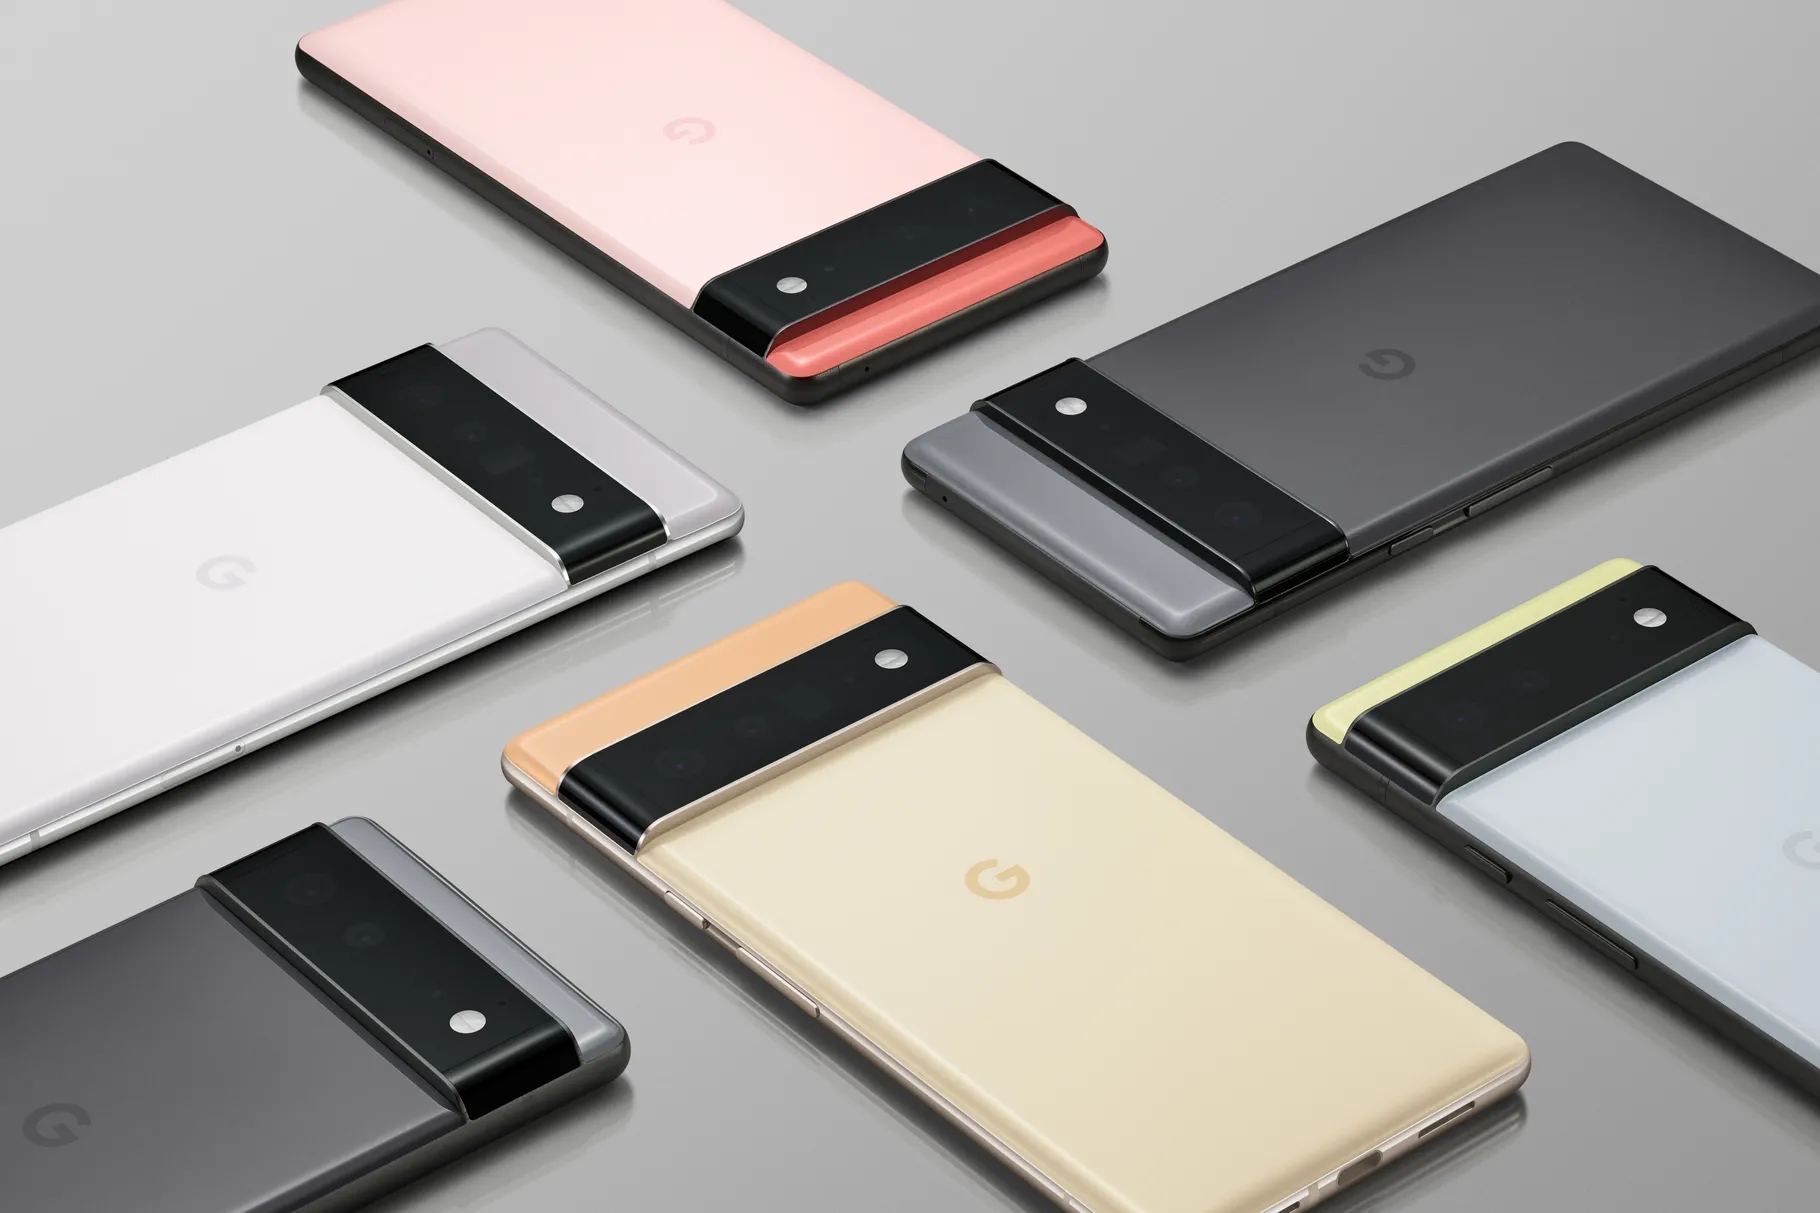 Following in the footsteps of Apple, Xiaomi and Samsung: Google will remove the power pack from the Pixel 6 and Pixel 6 Pro